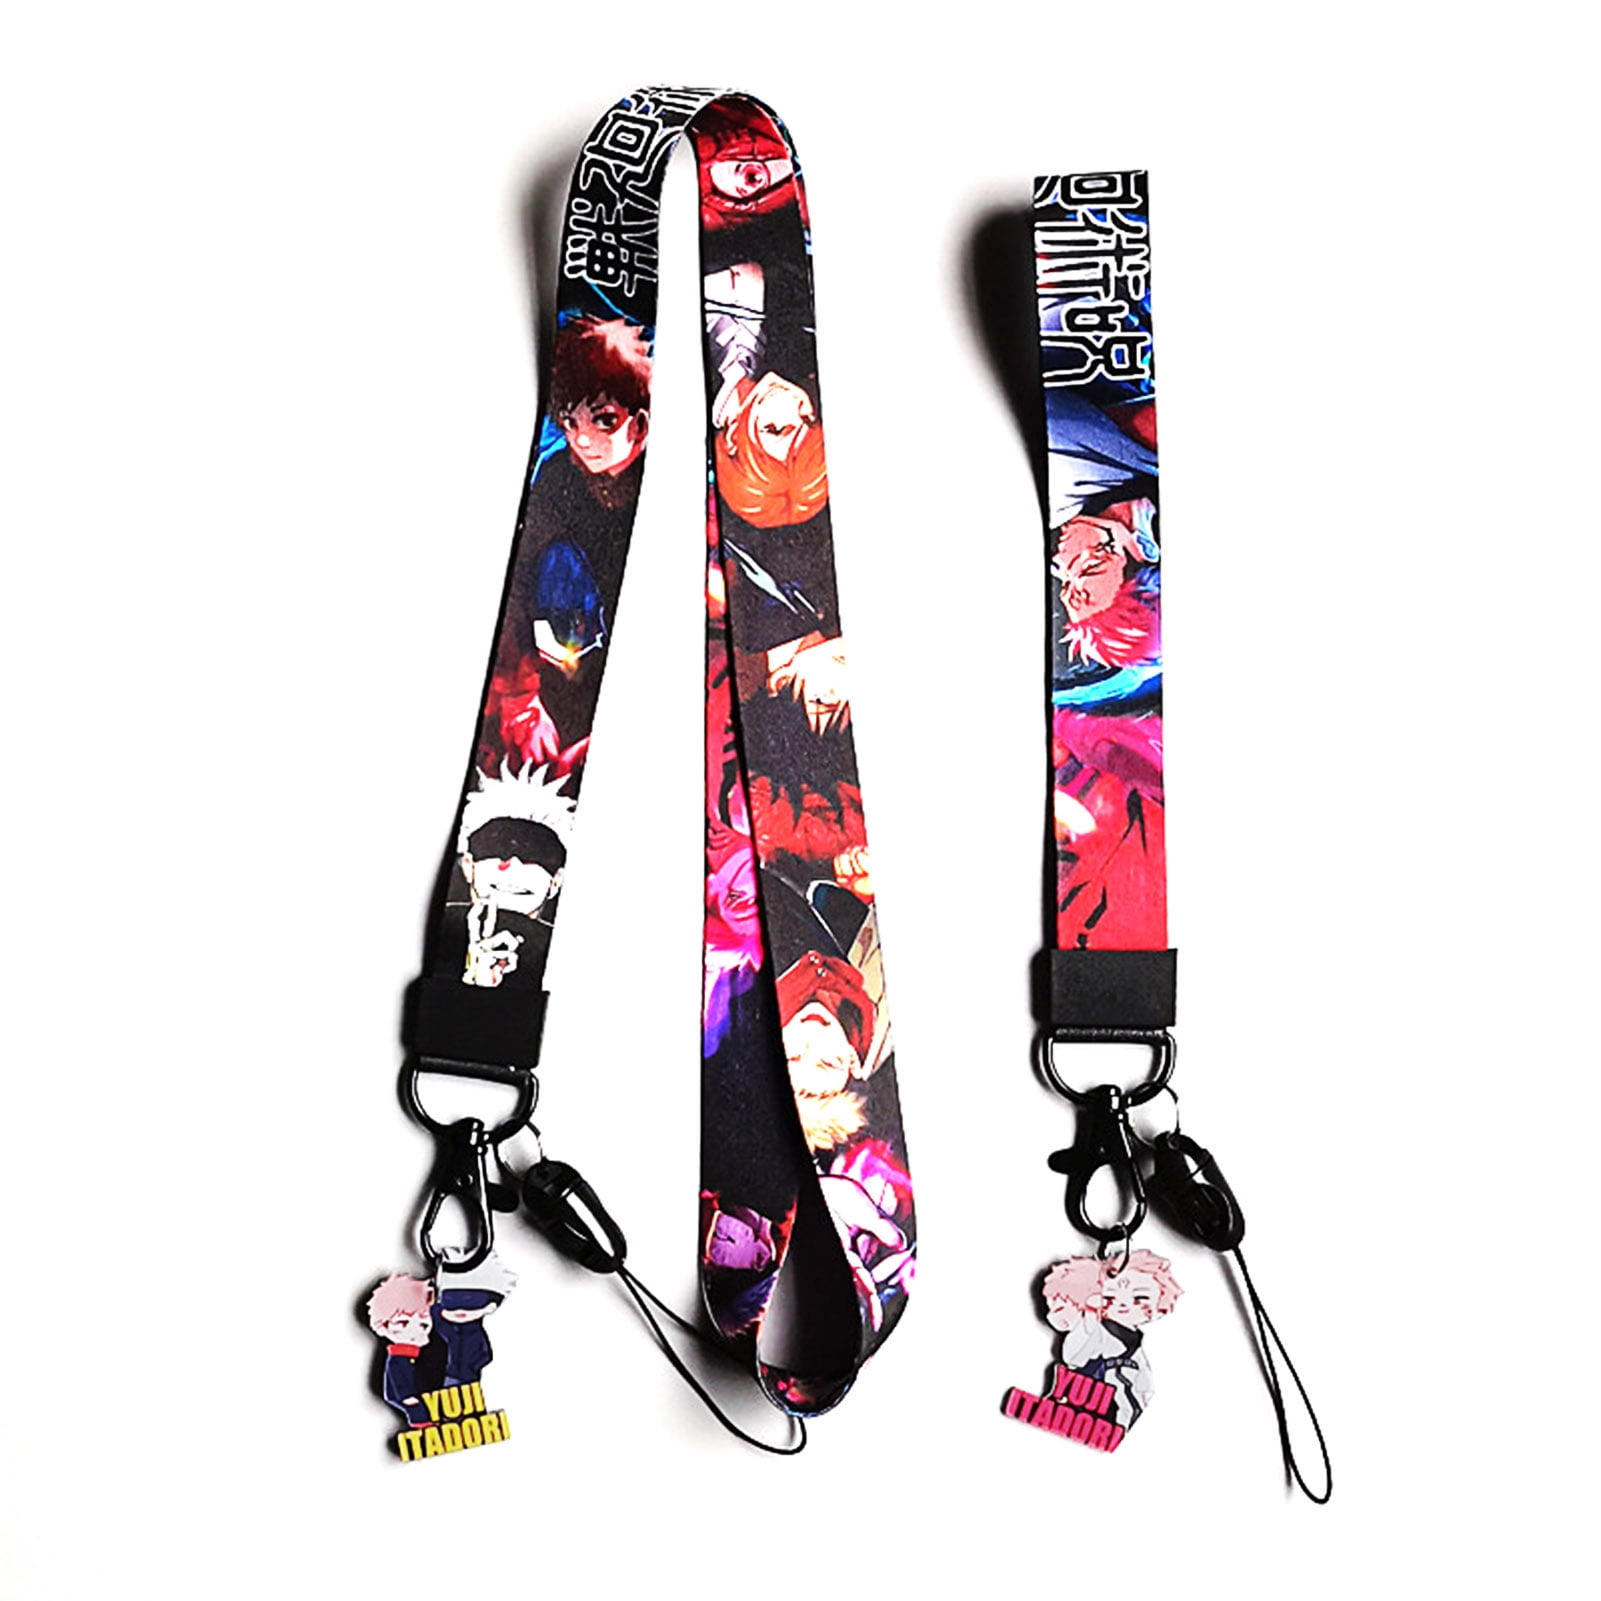 10pcs anime boys party gift mix Lanyard Mobile Phone ID Card KeyChain Holder D01 